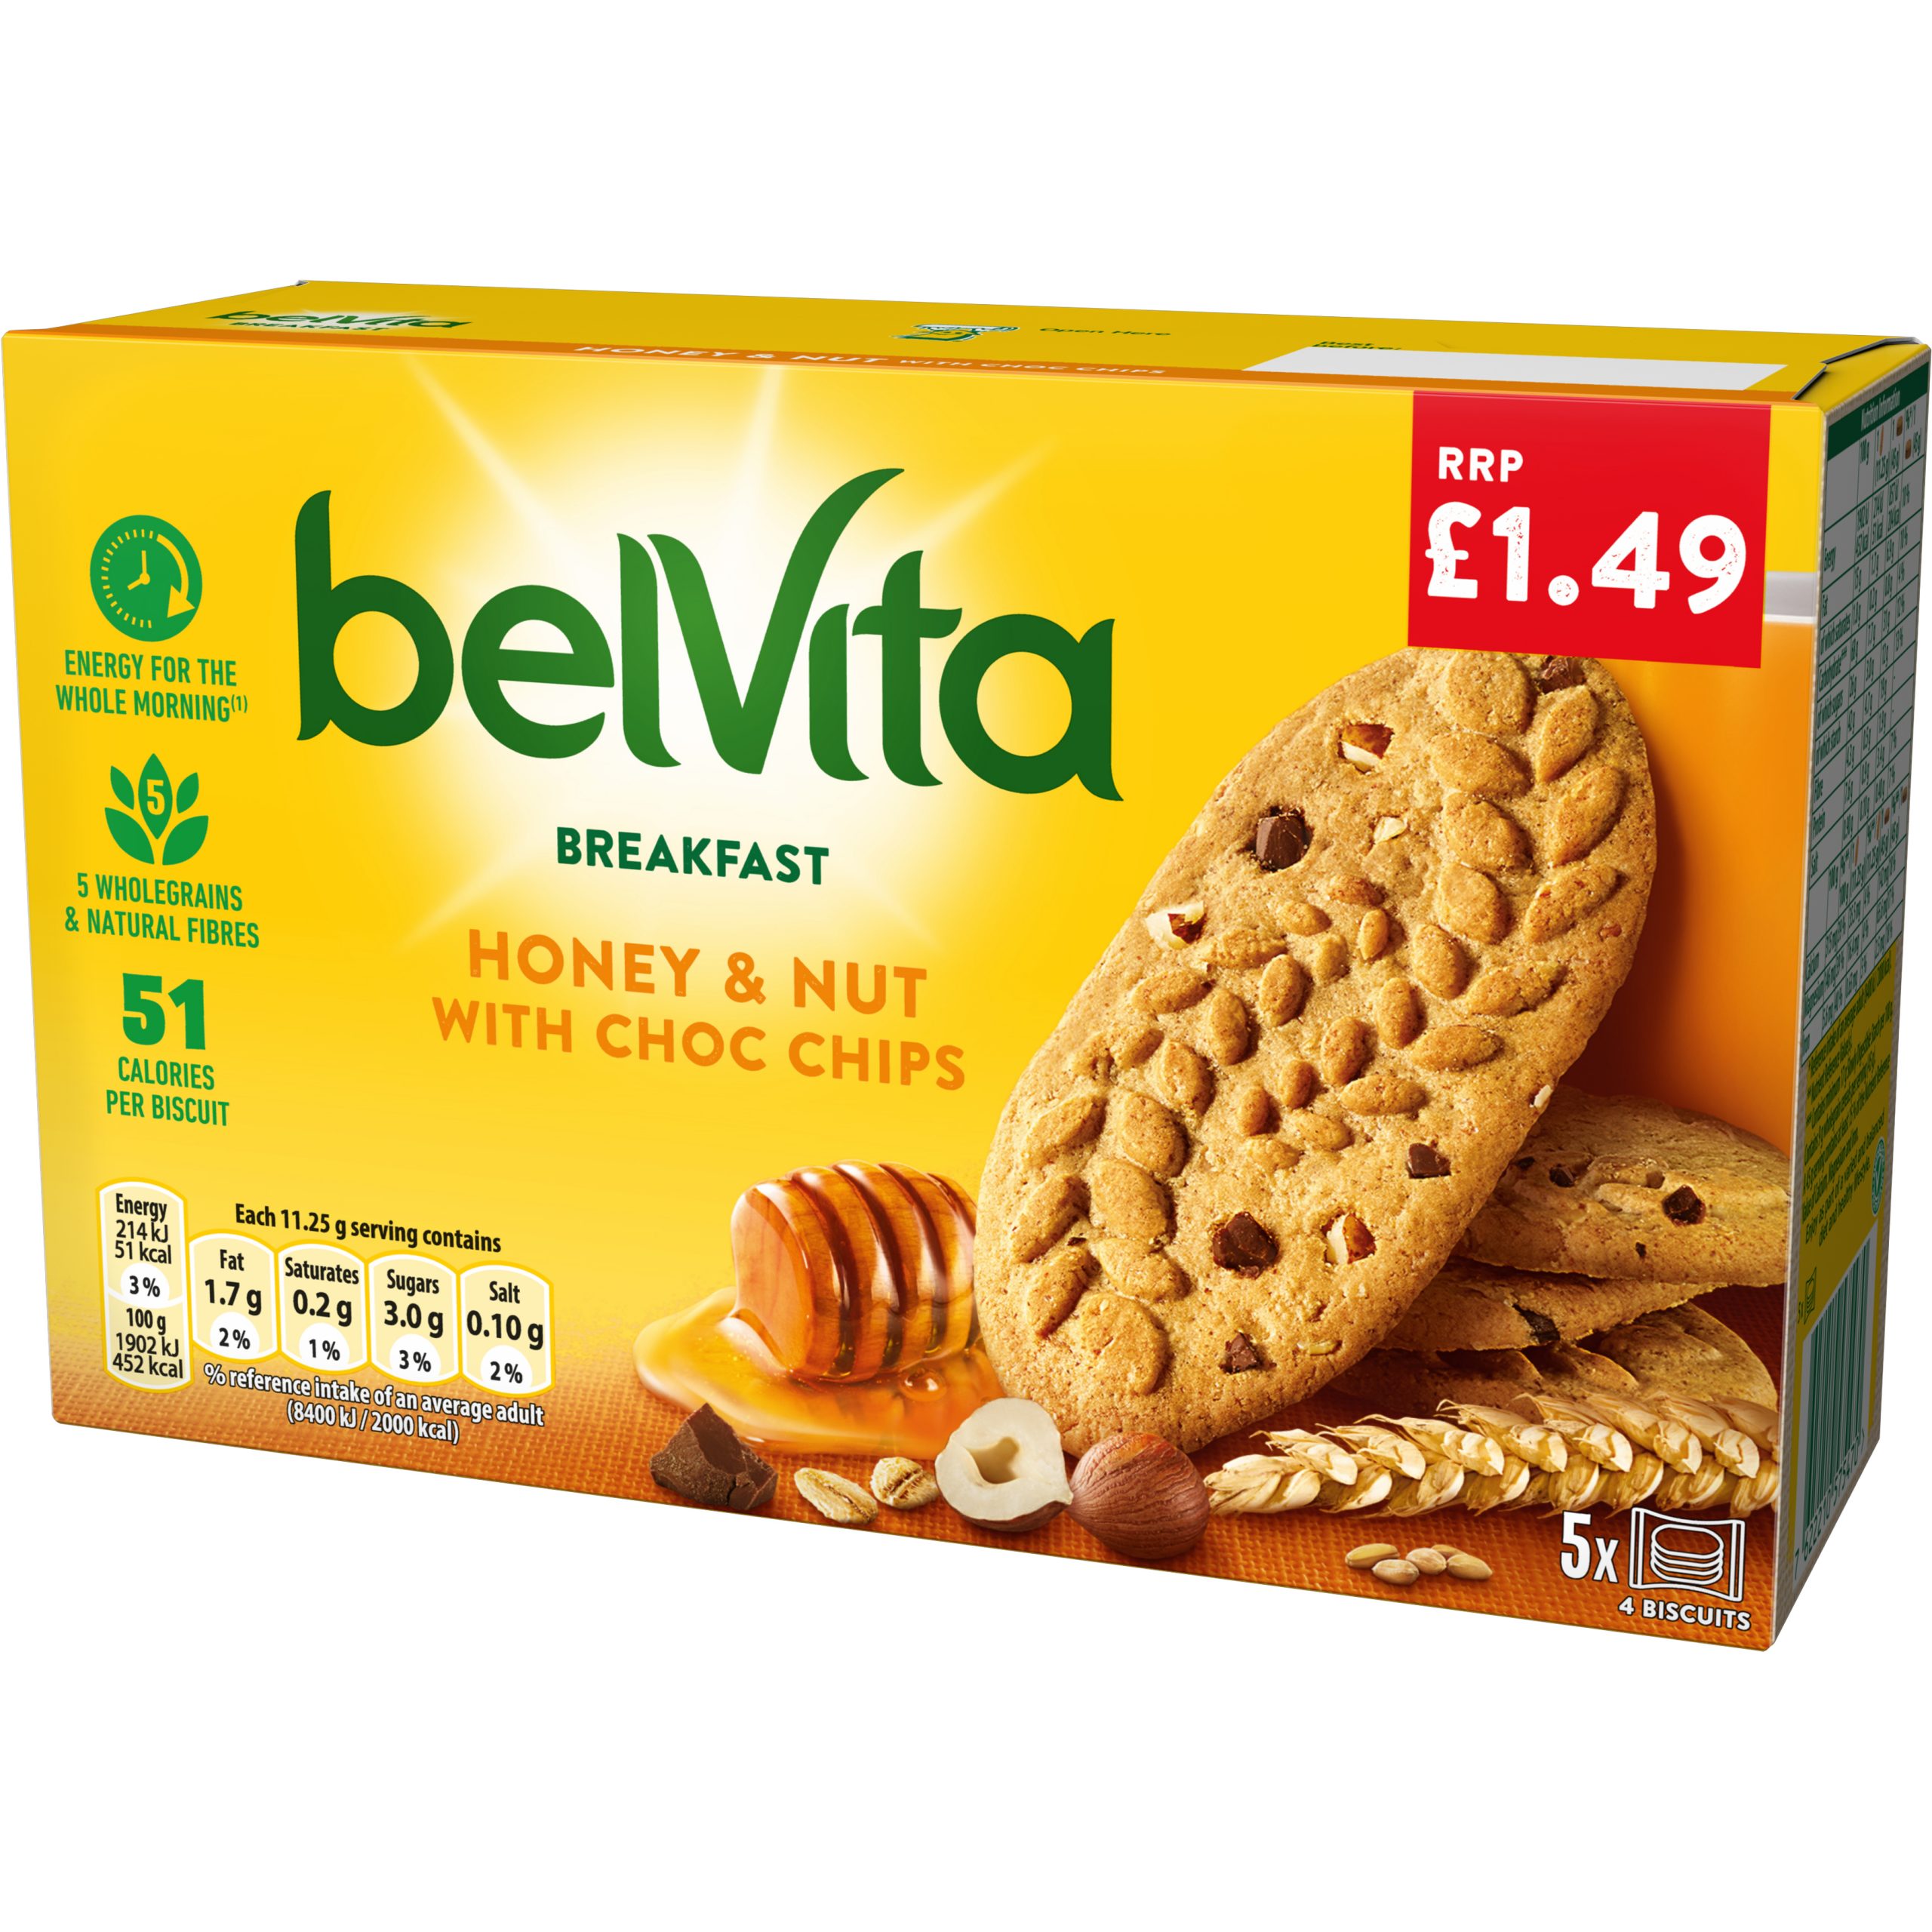 belVita adds value for c-channel retailers with new PMP format